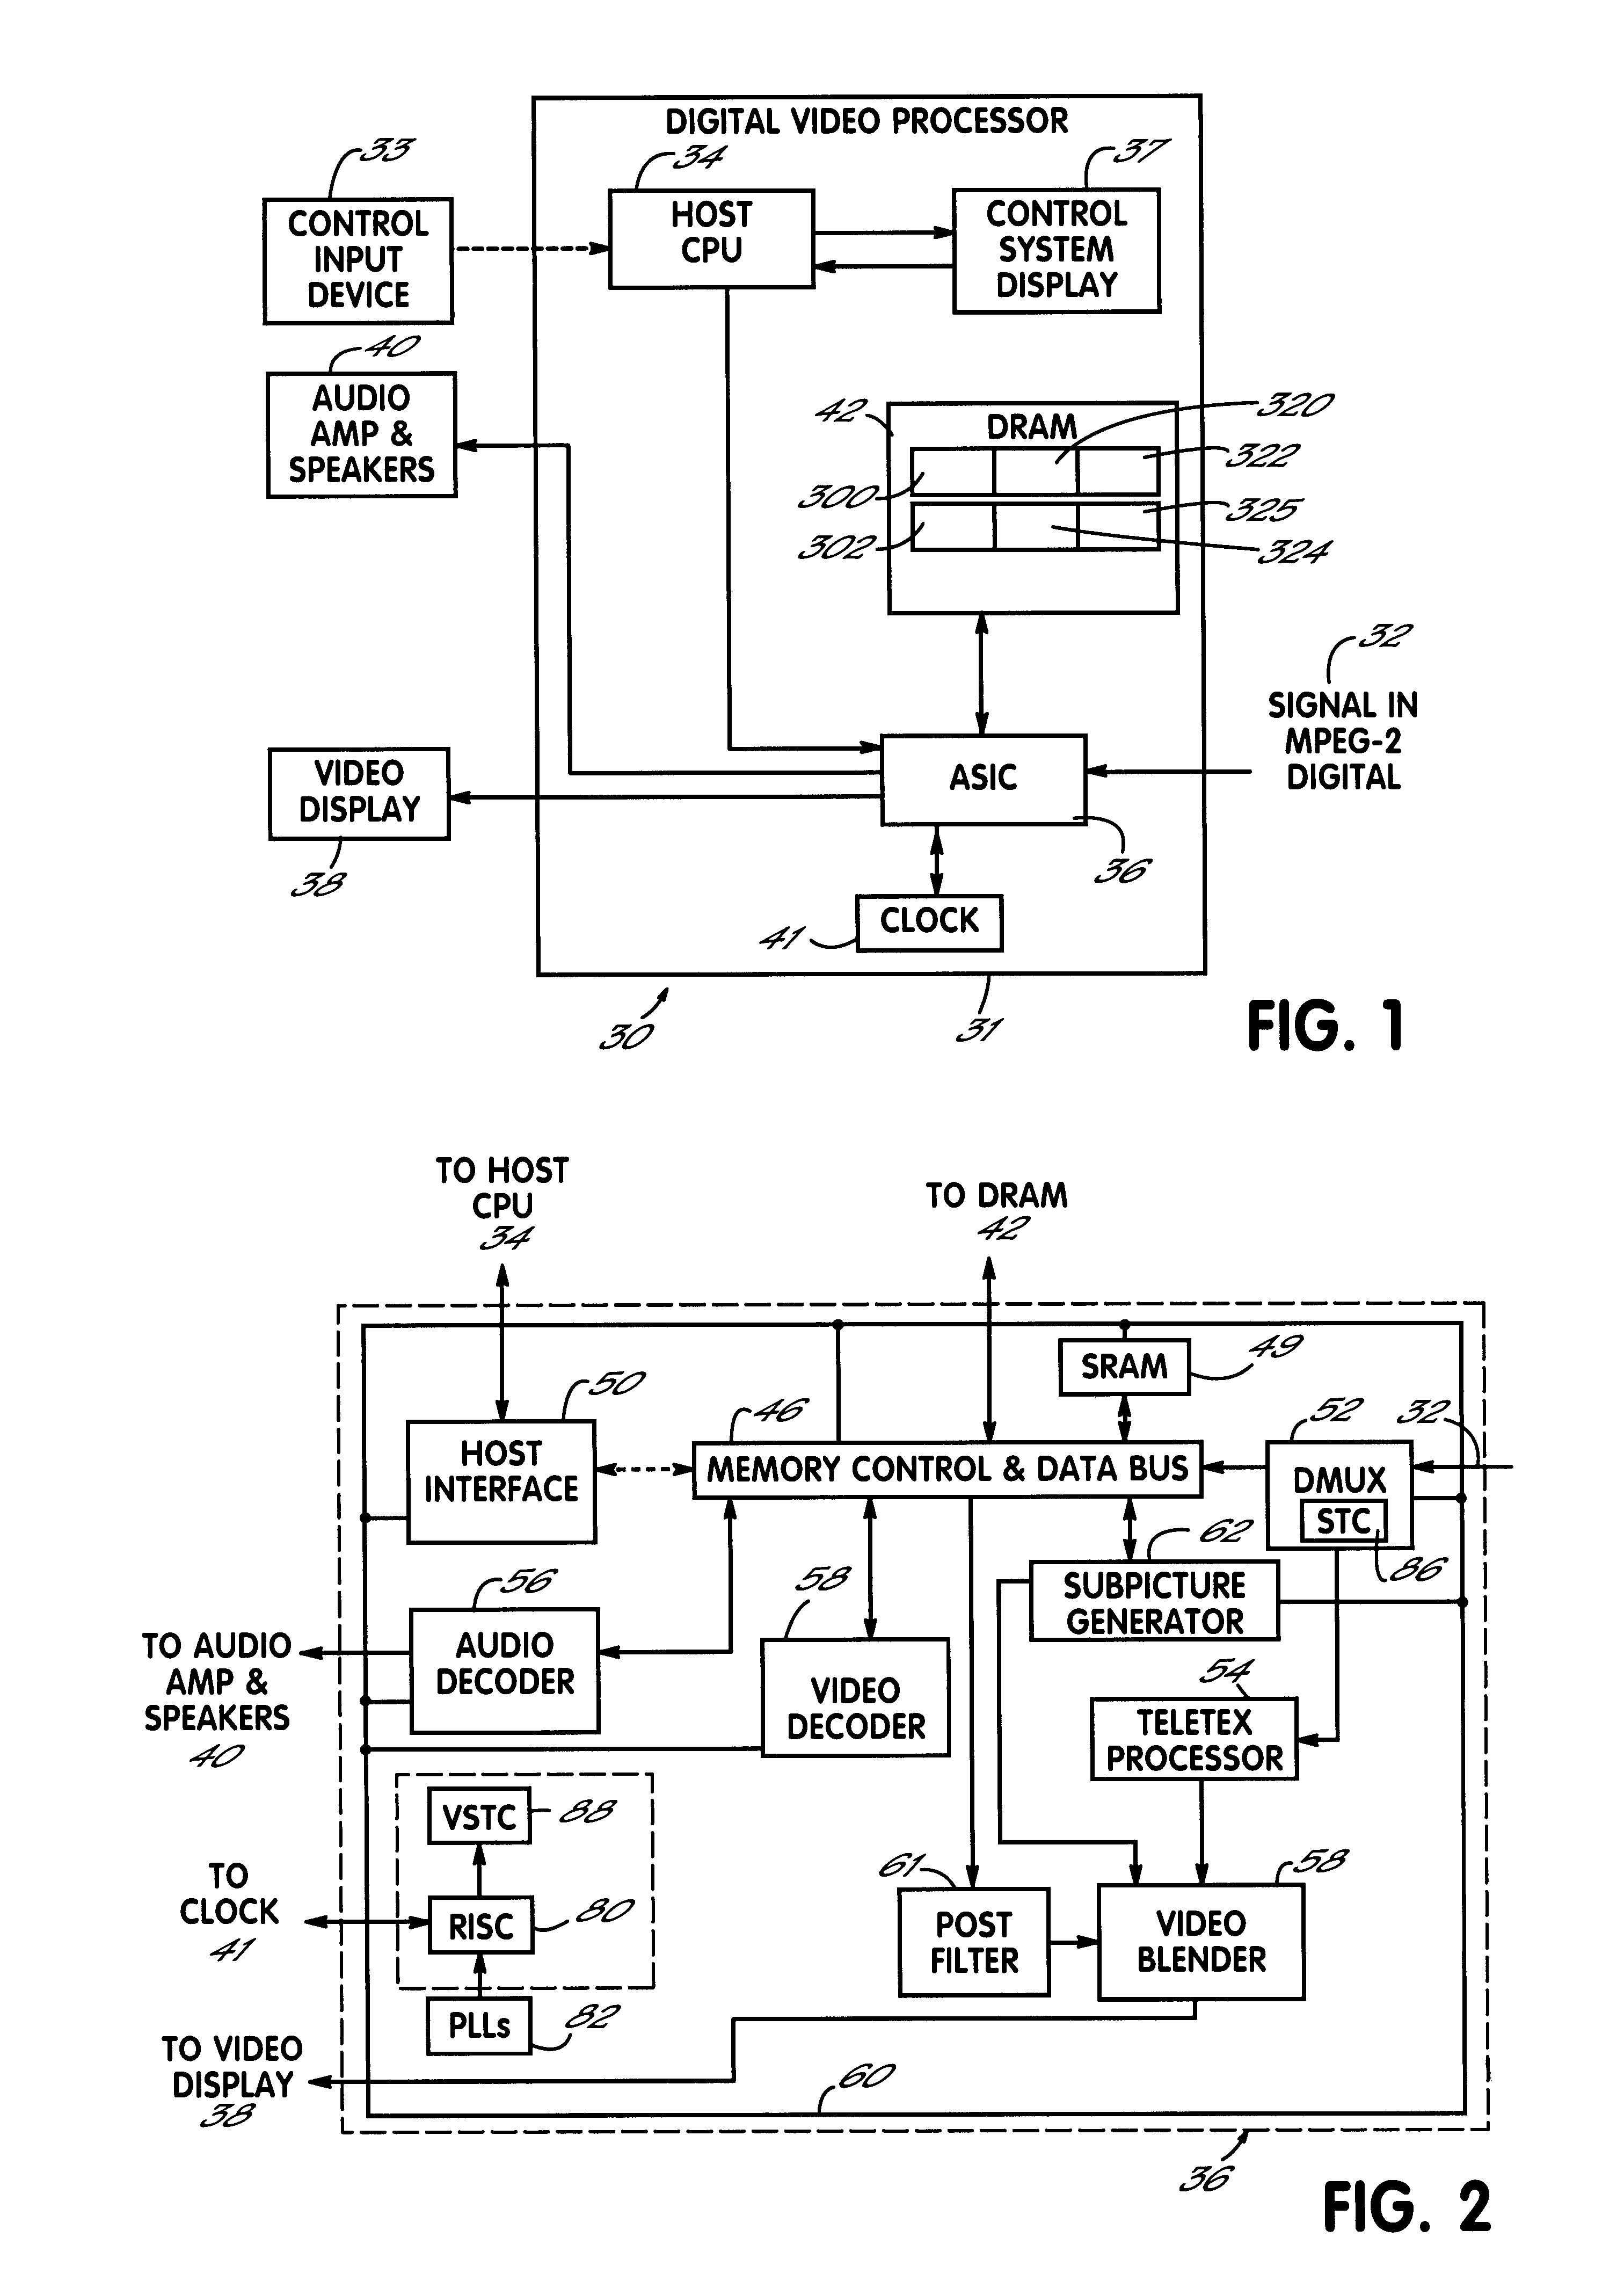 Method and apparatus for a virtual system time clock for digital audio/video processor